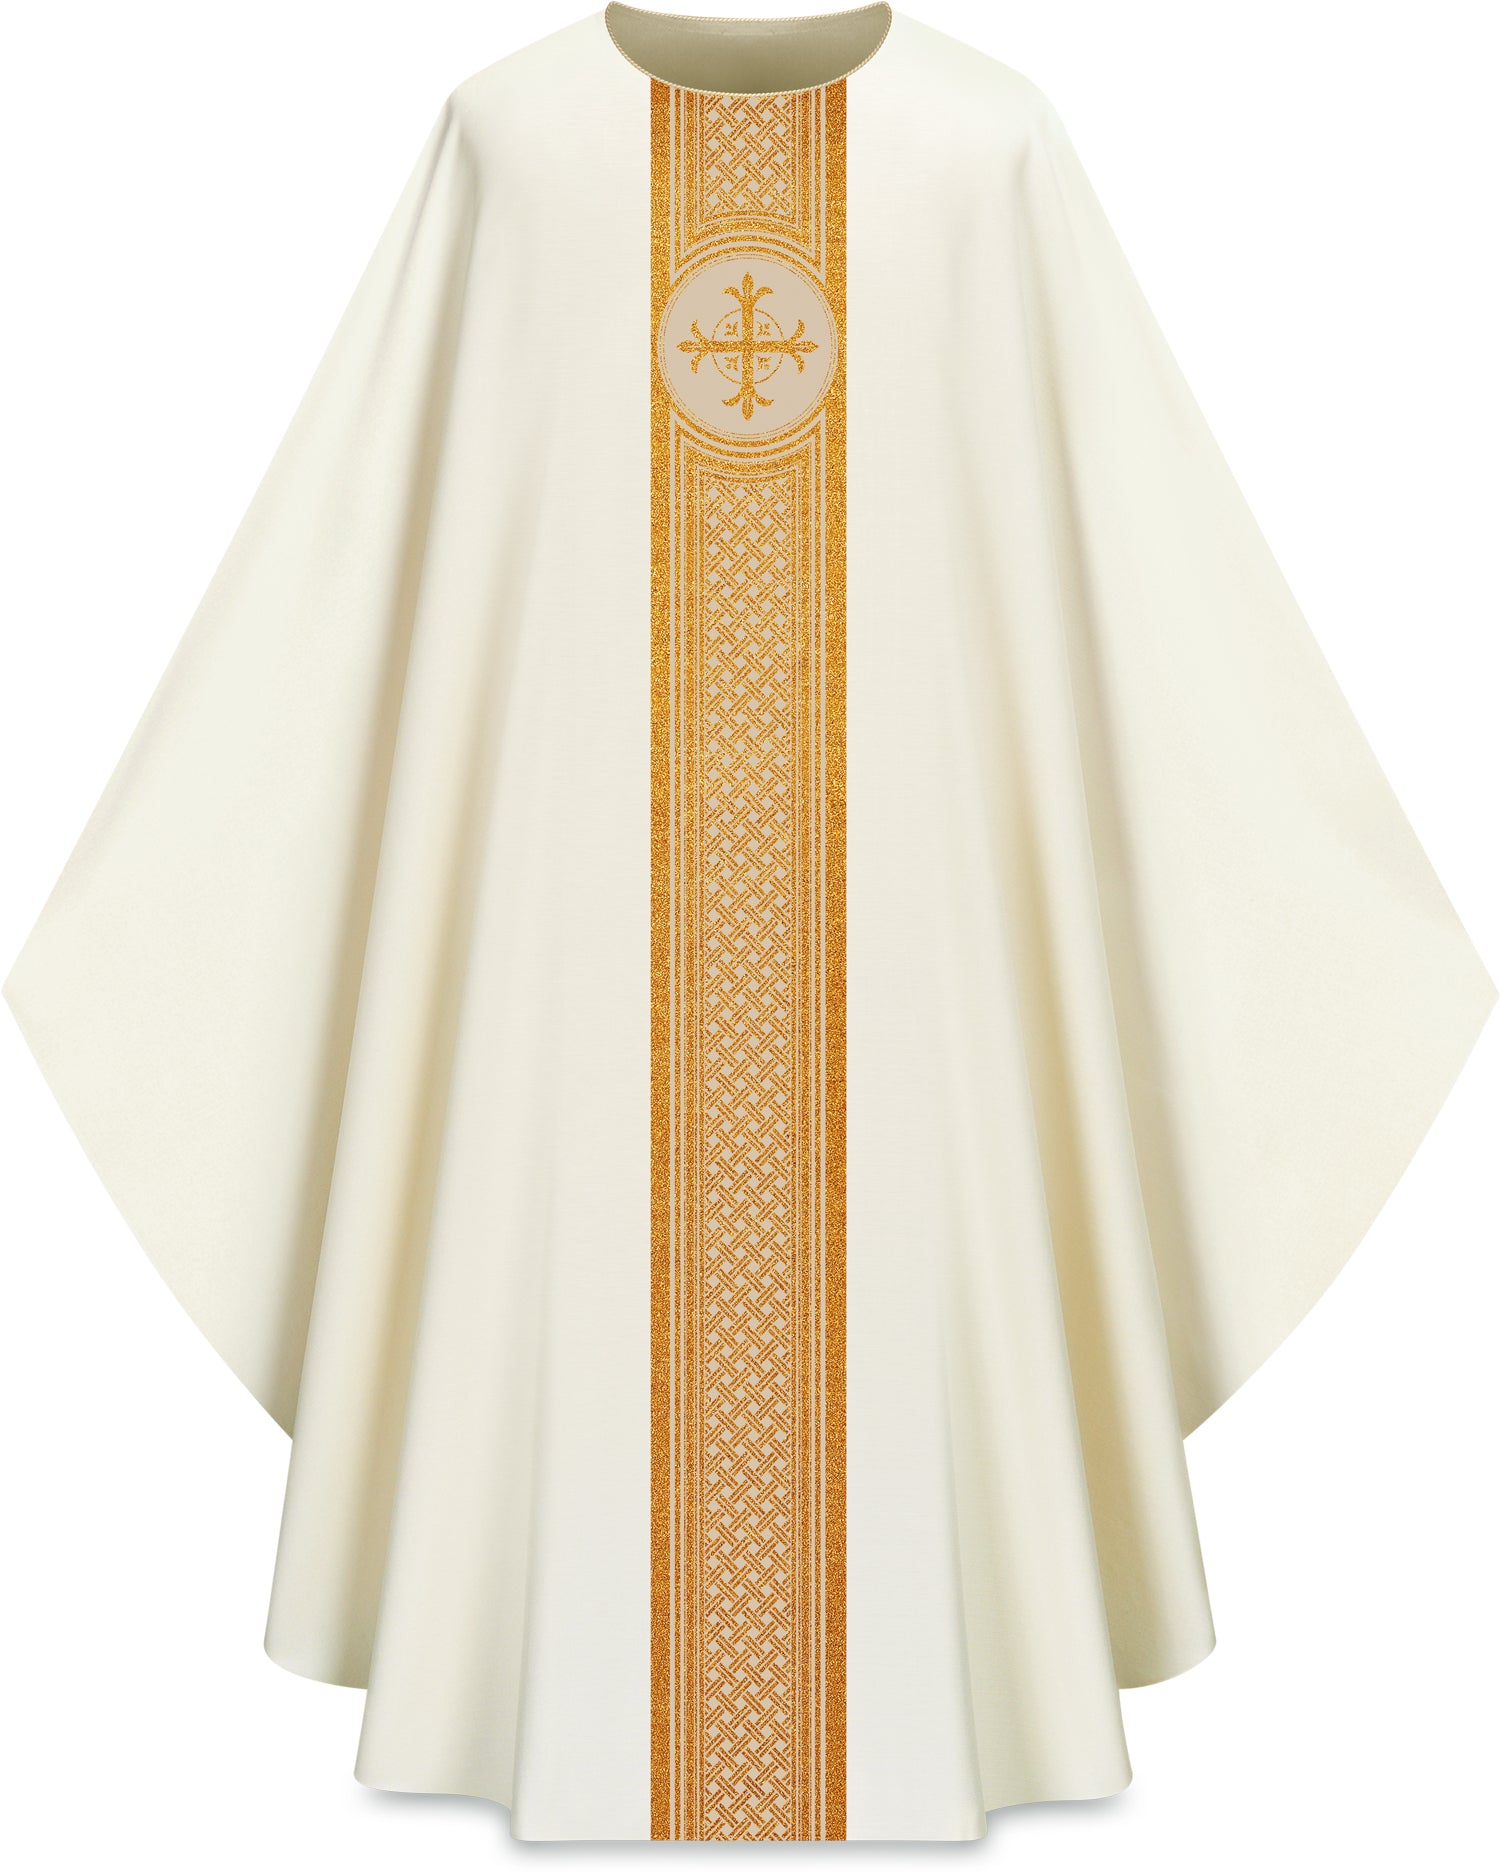 Chasuble with Woven Band | ASSISI by SLABBINCK